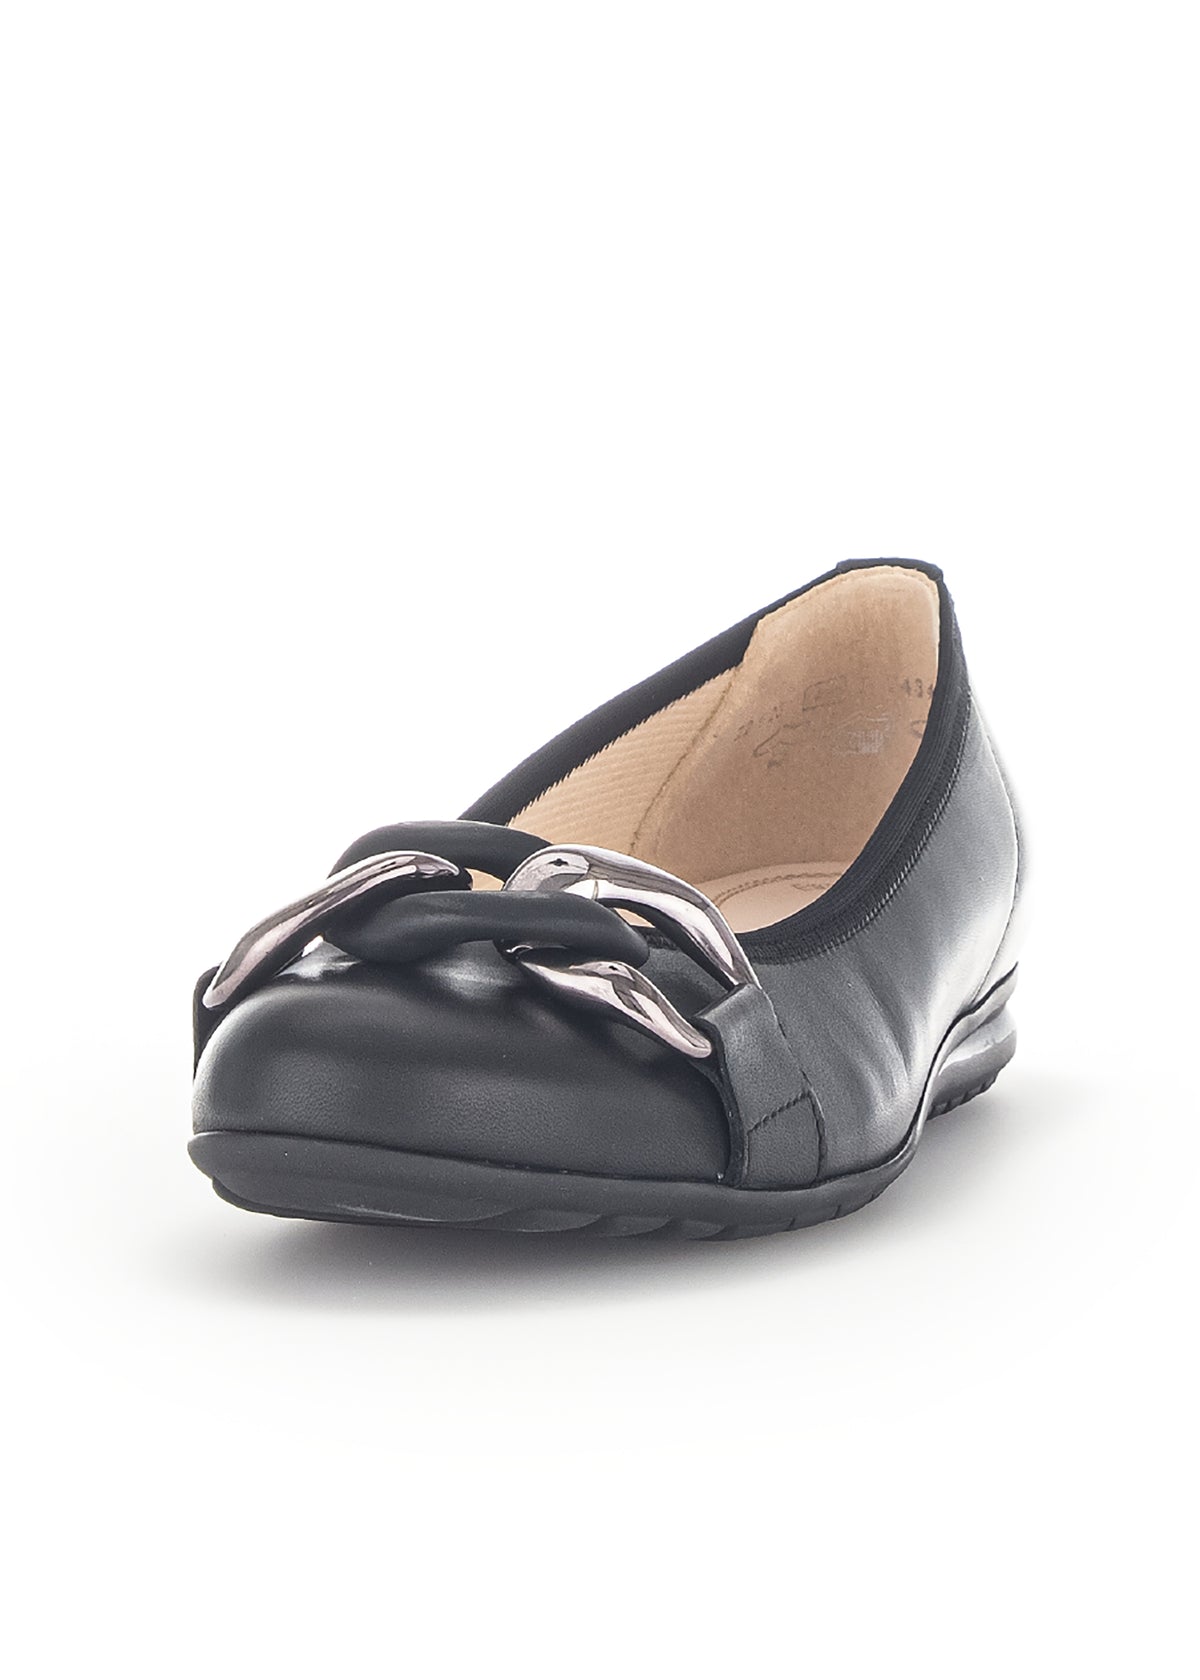 Ballerina shoes - black leather, silver knot decoration